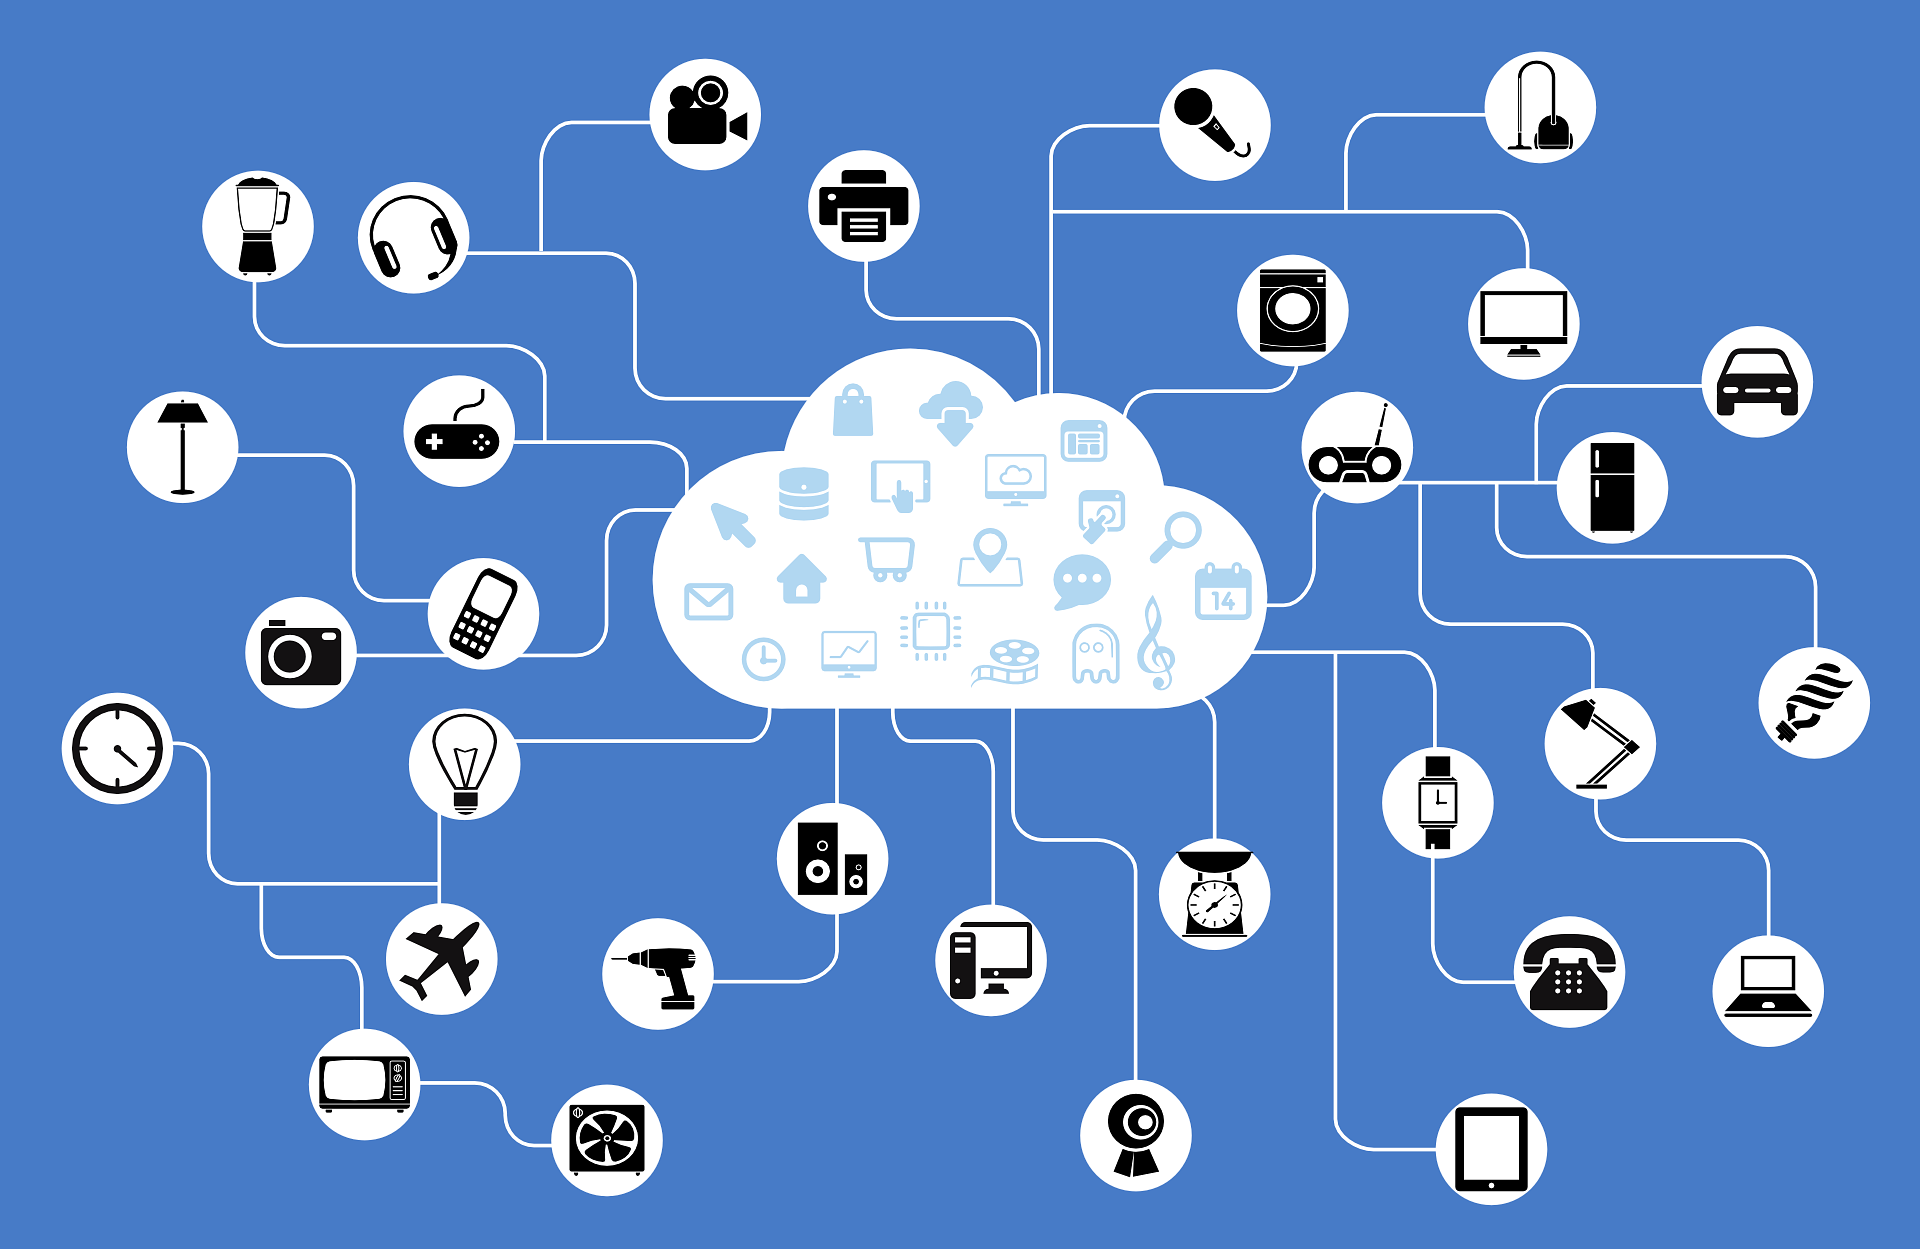 Image showing the concept of the Internet of Things, with a cloud at the center and a variety of connected things around it.